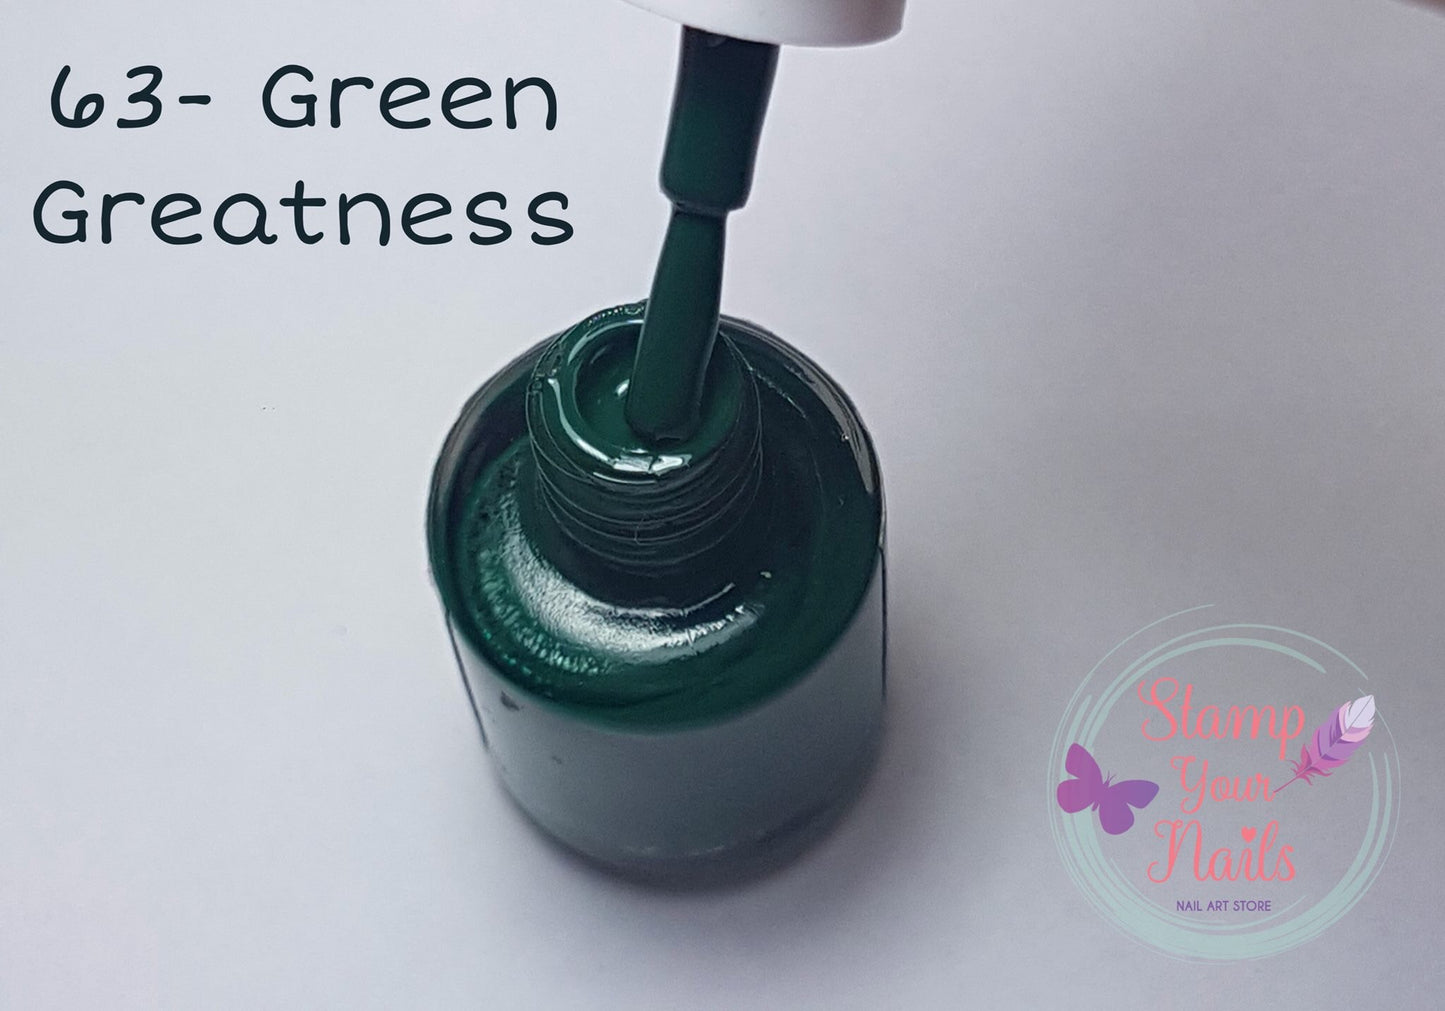 63 Green Greatness - Stamp your nails